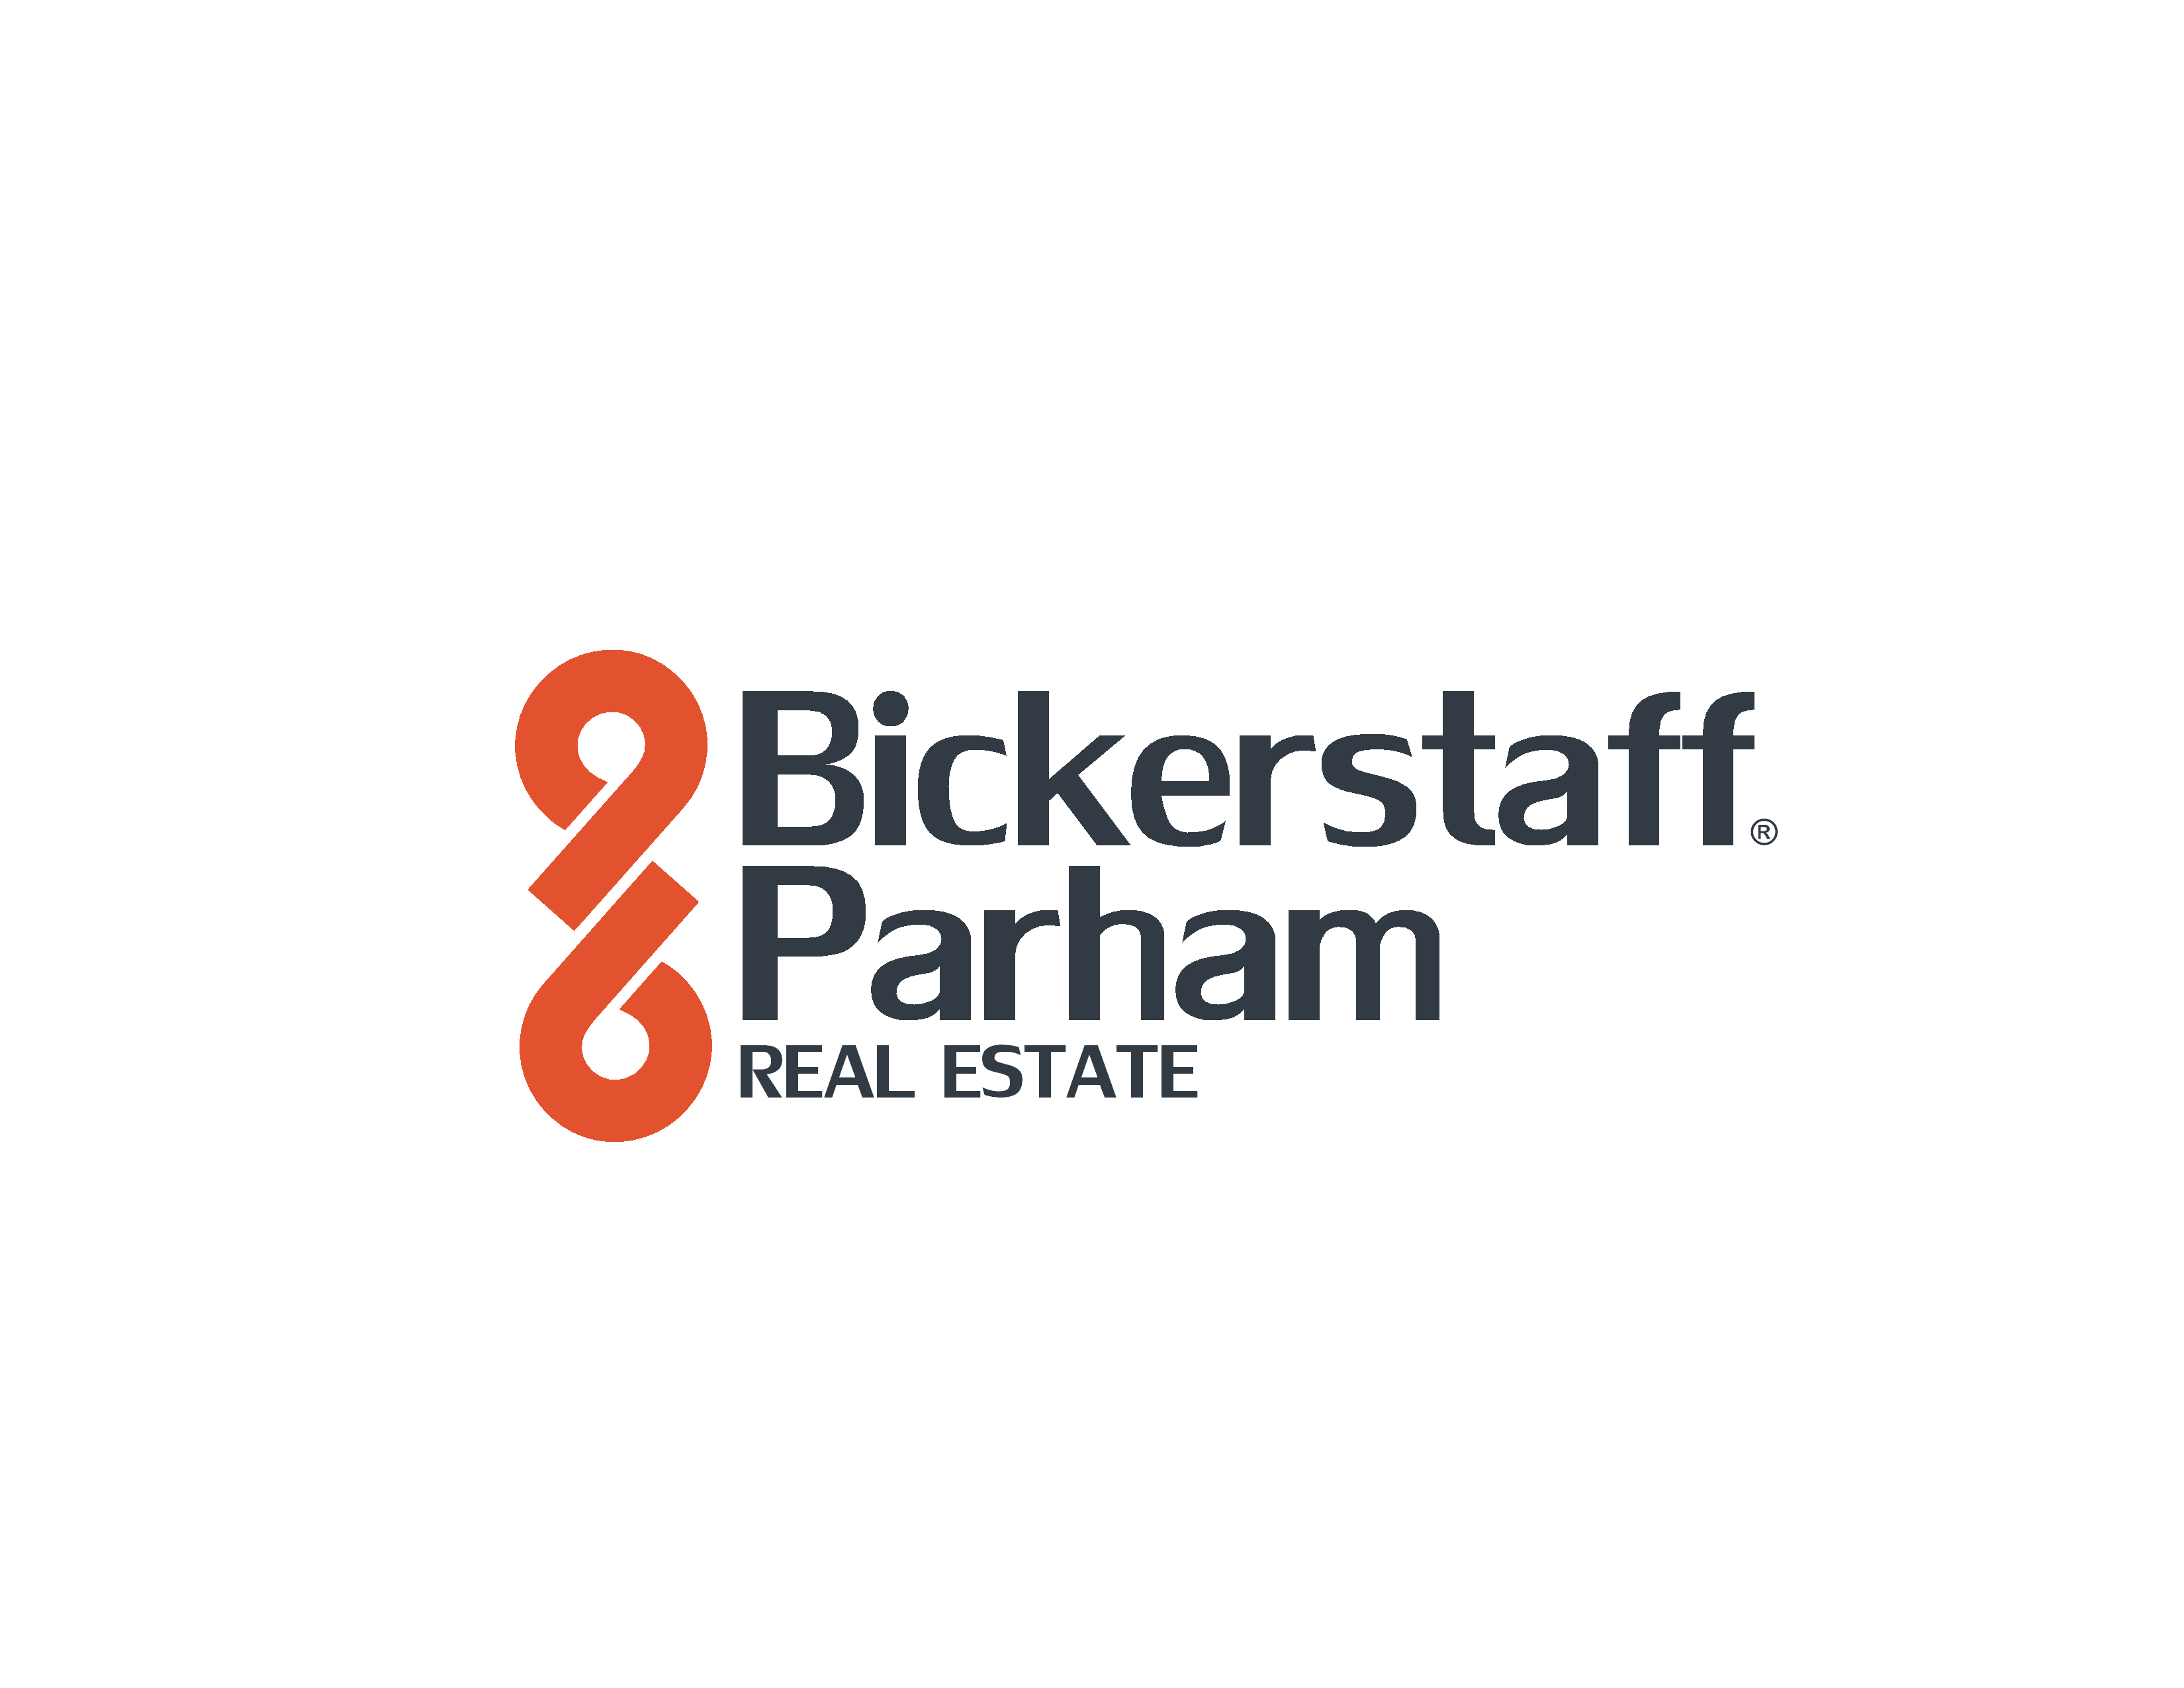 The initial vision of Bickerstaff Parham Real Estate is now a reality; culminating in the launch of their 18,000 square foot state-of-the-art 'Home Office' located at 5547 Veterans Parkway.